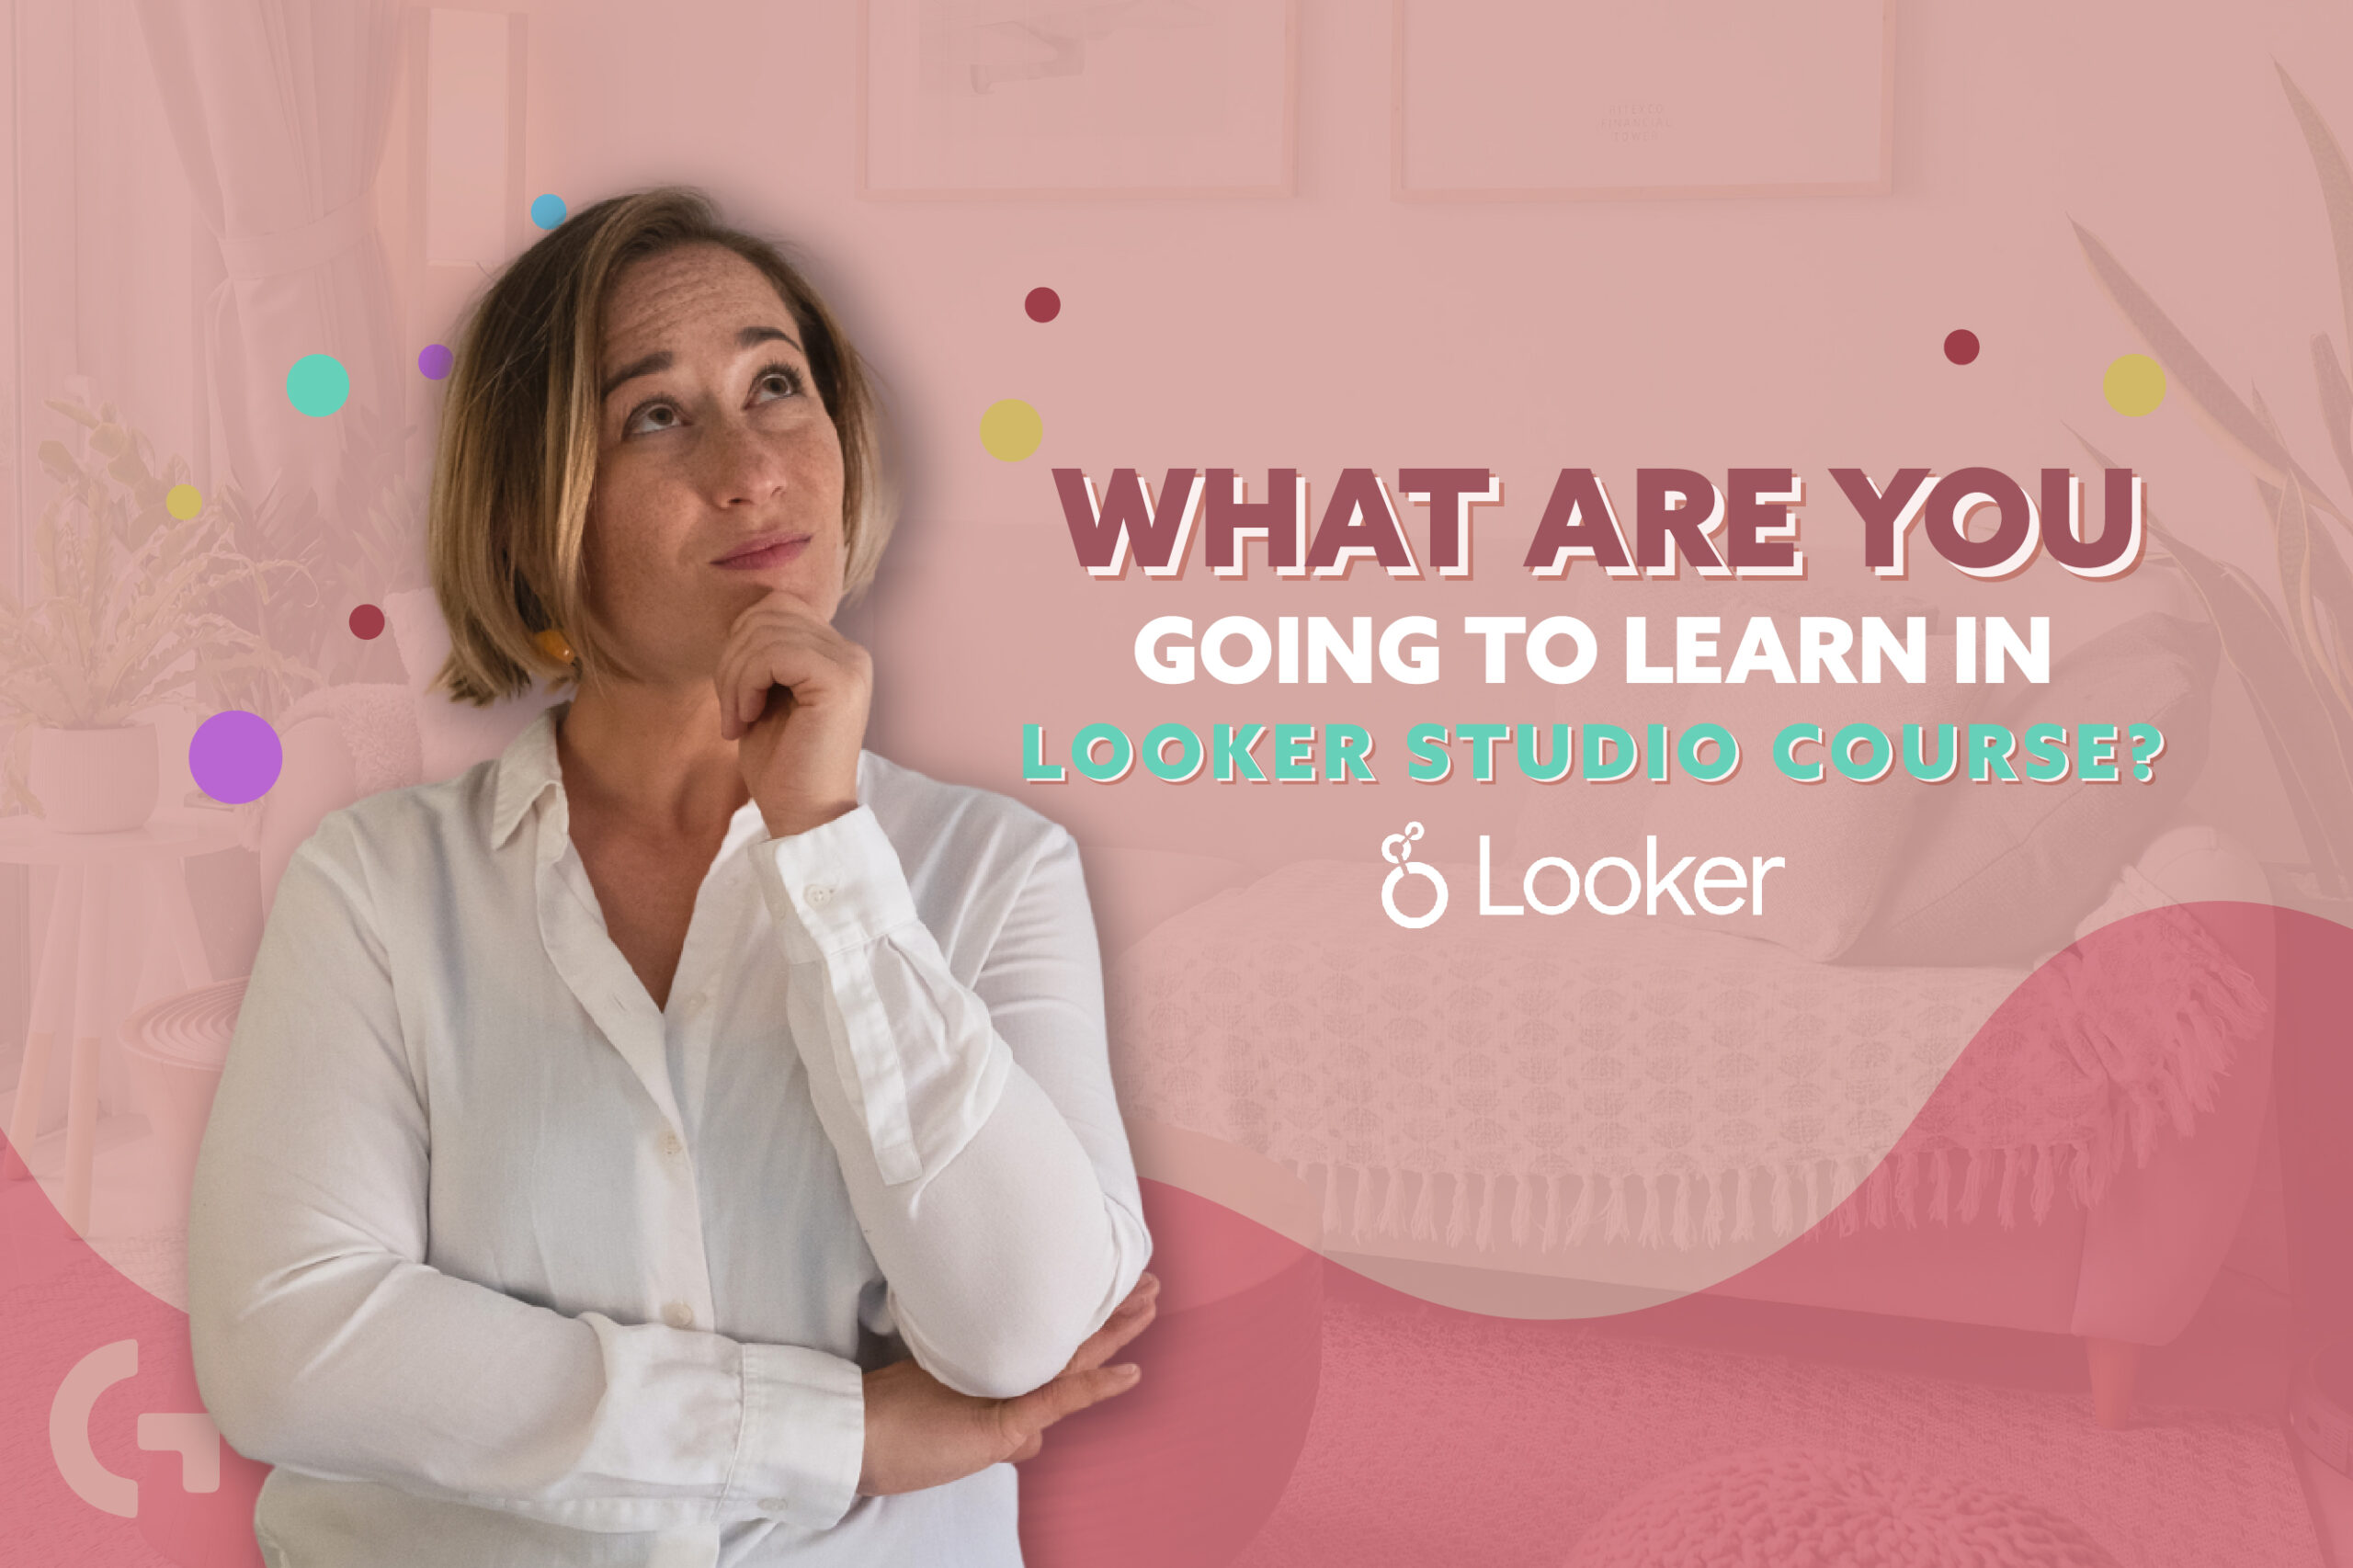 What are you going to learn in the Looker Studio course?